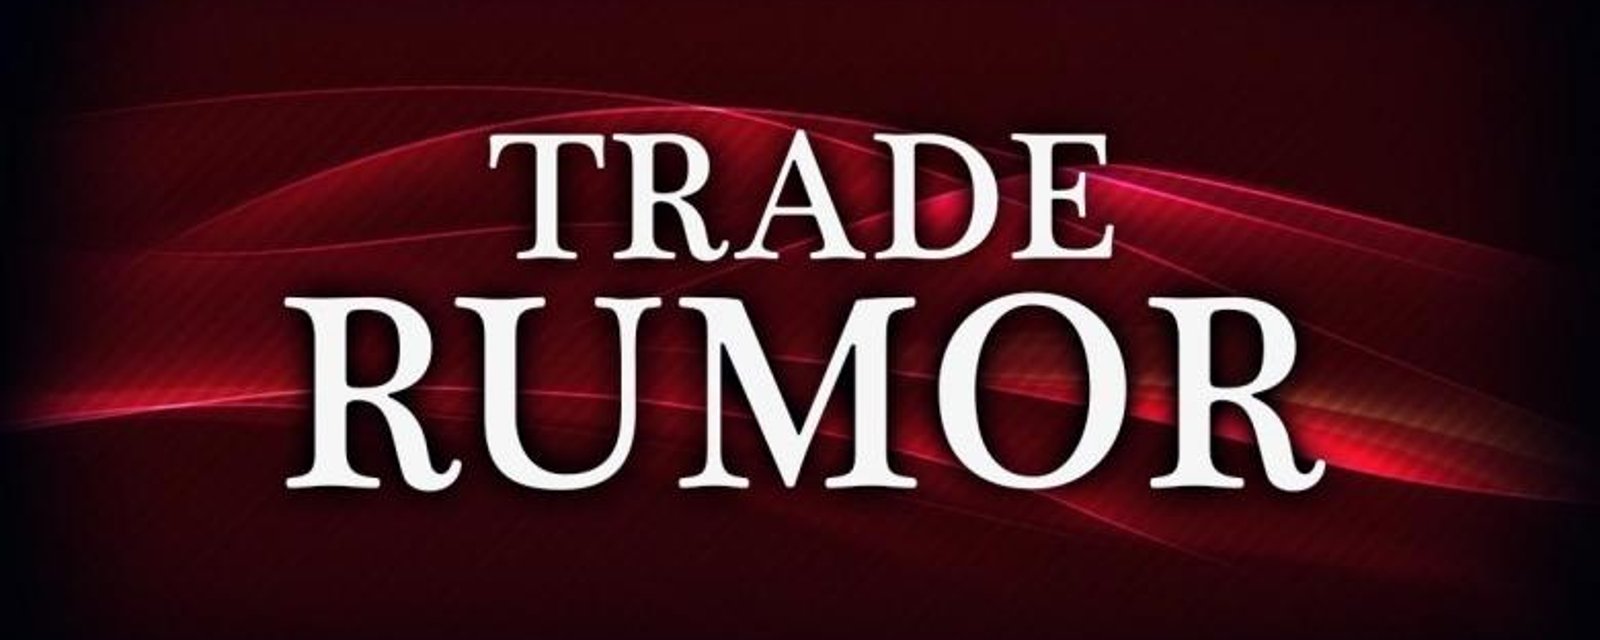 Rumor: Trade rumors fly as things “may get ugly” during arbitration.